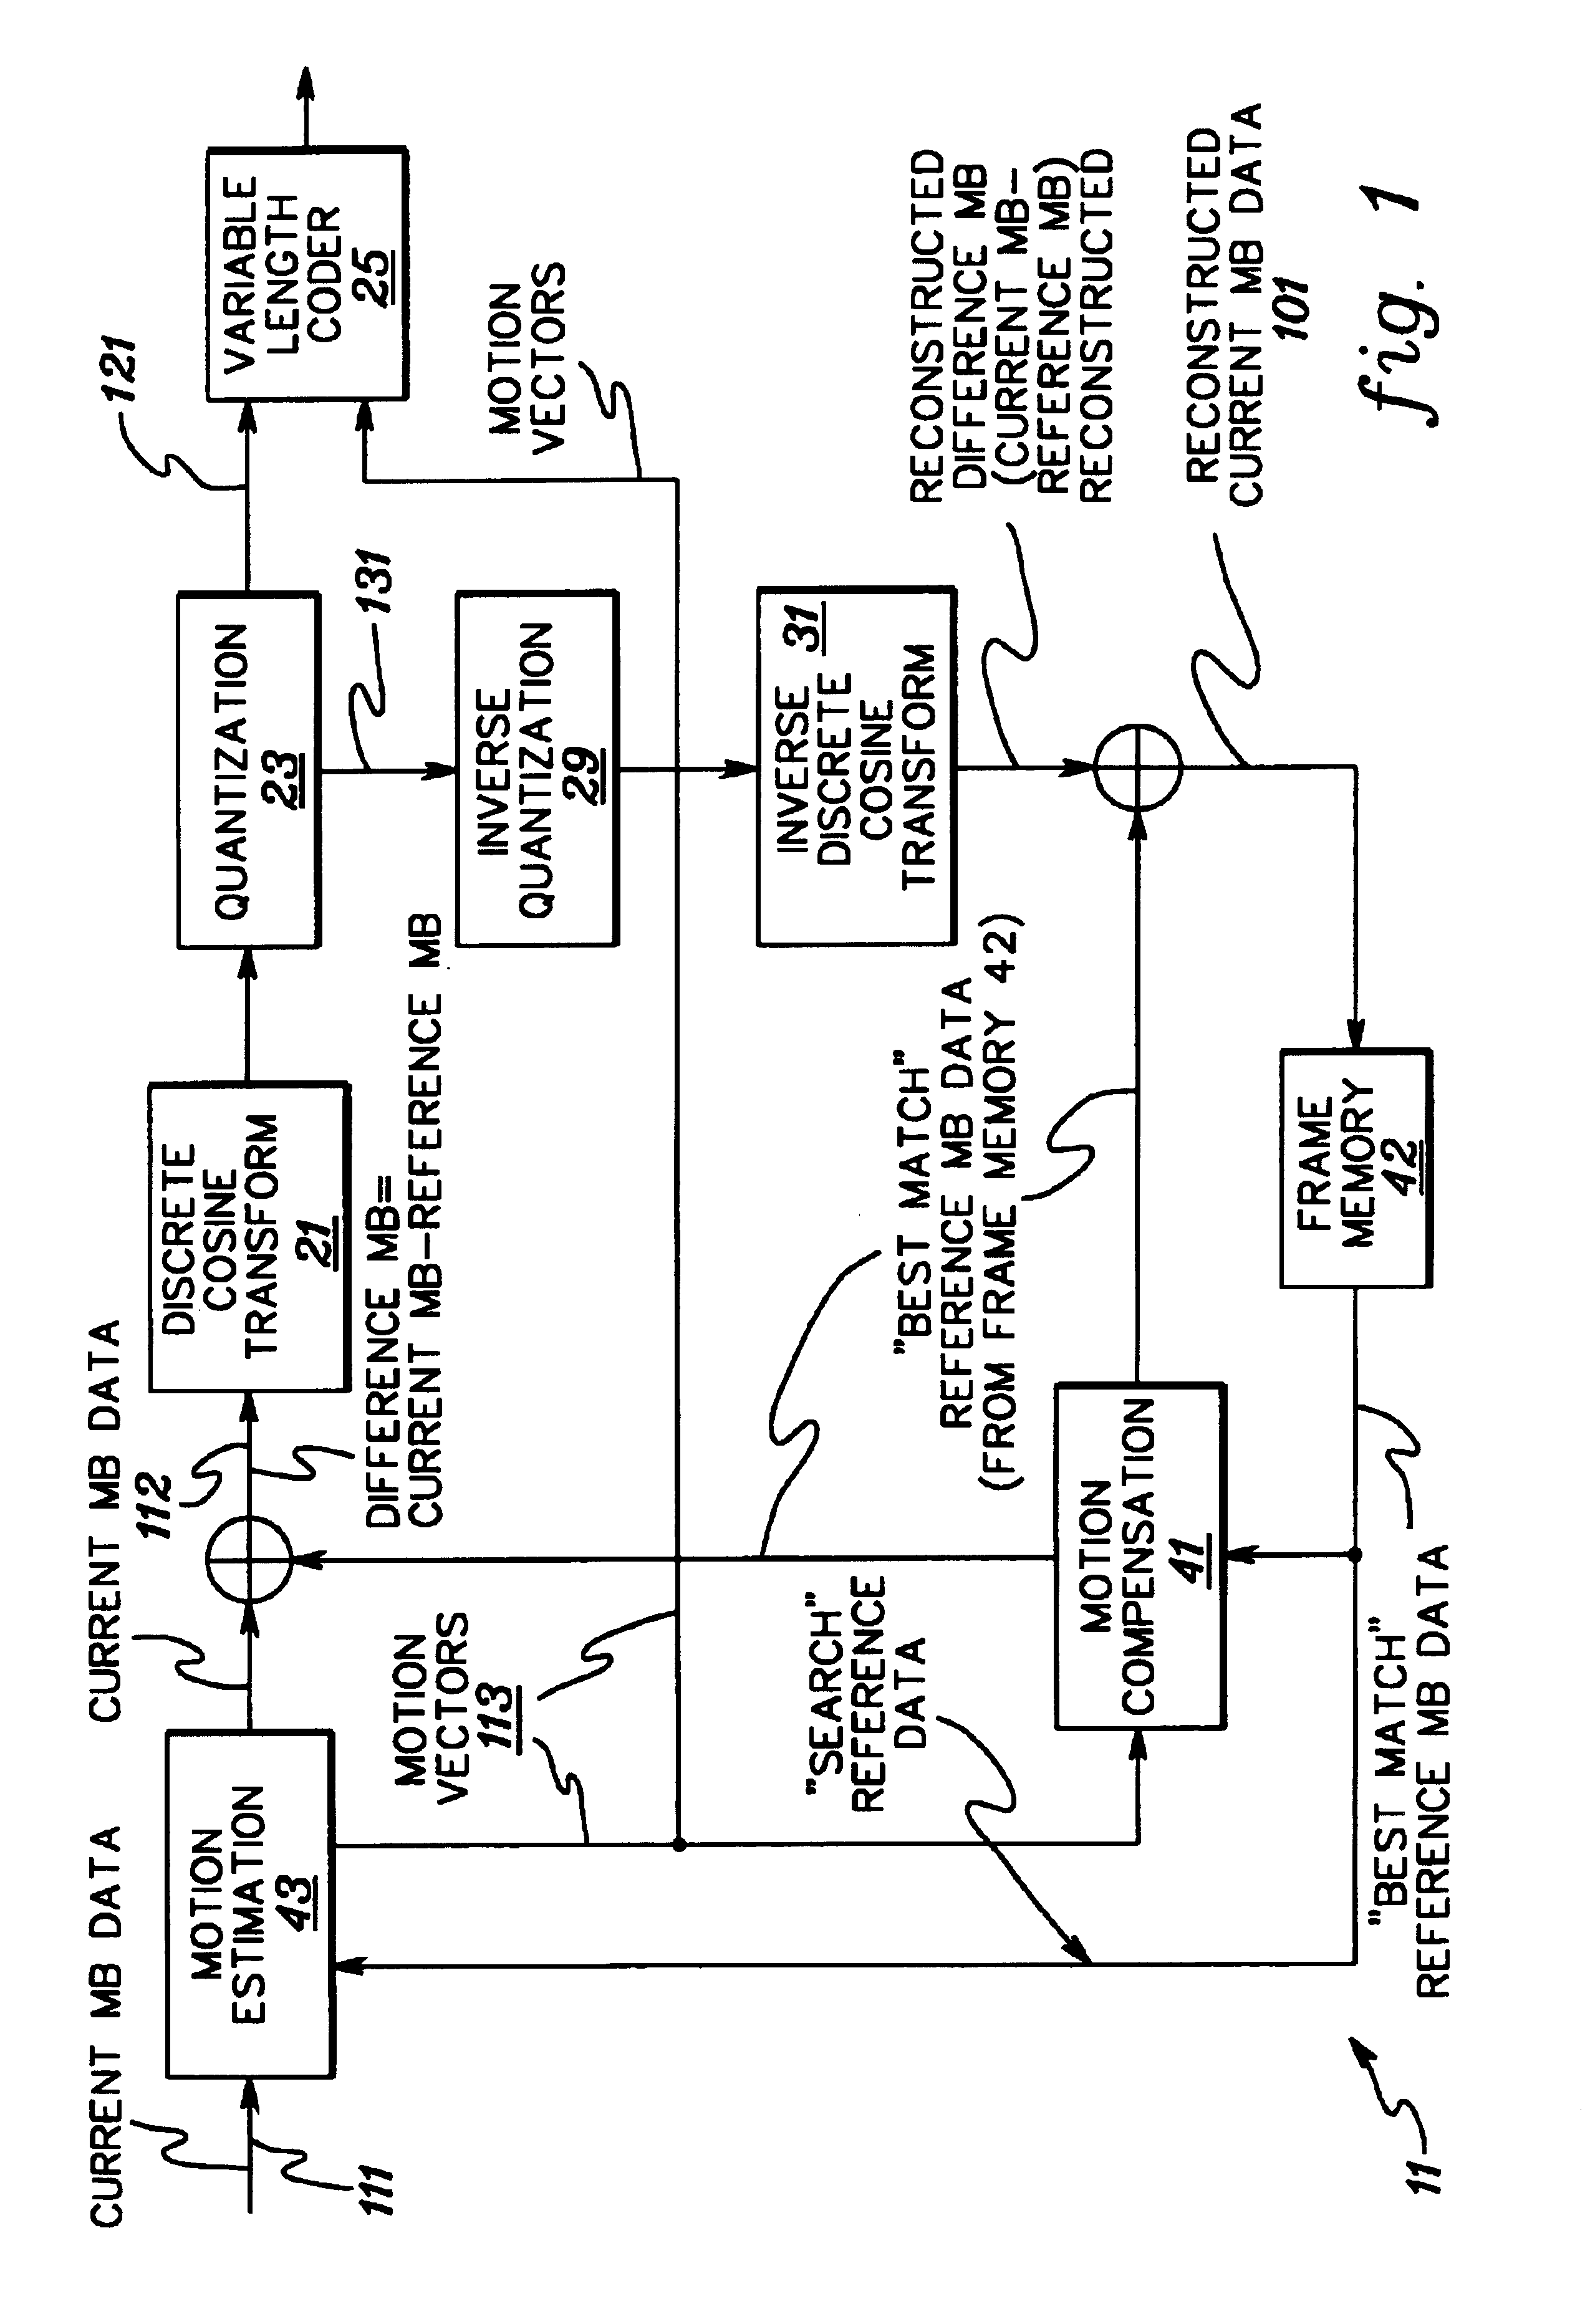 Adaptive encoding of a sequence of still frames or partially still frames within motion video